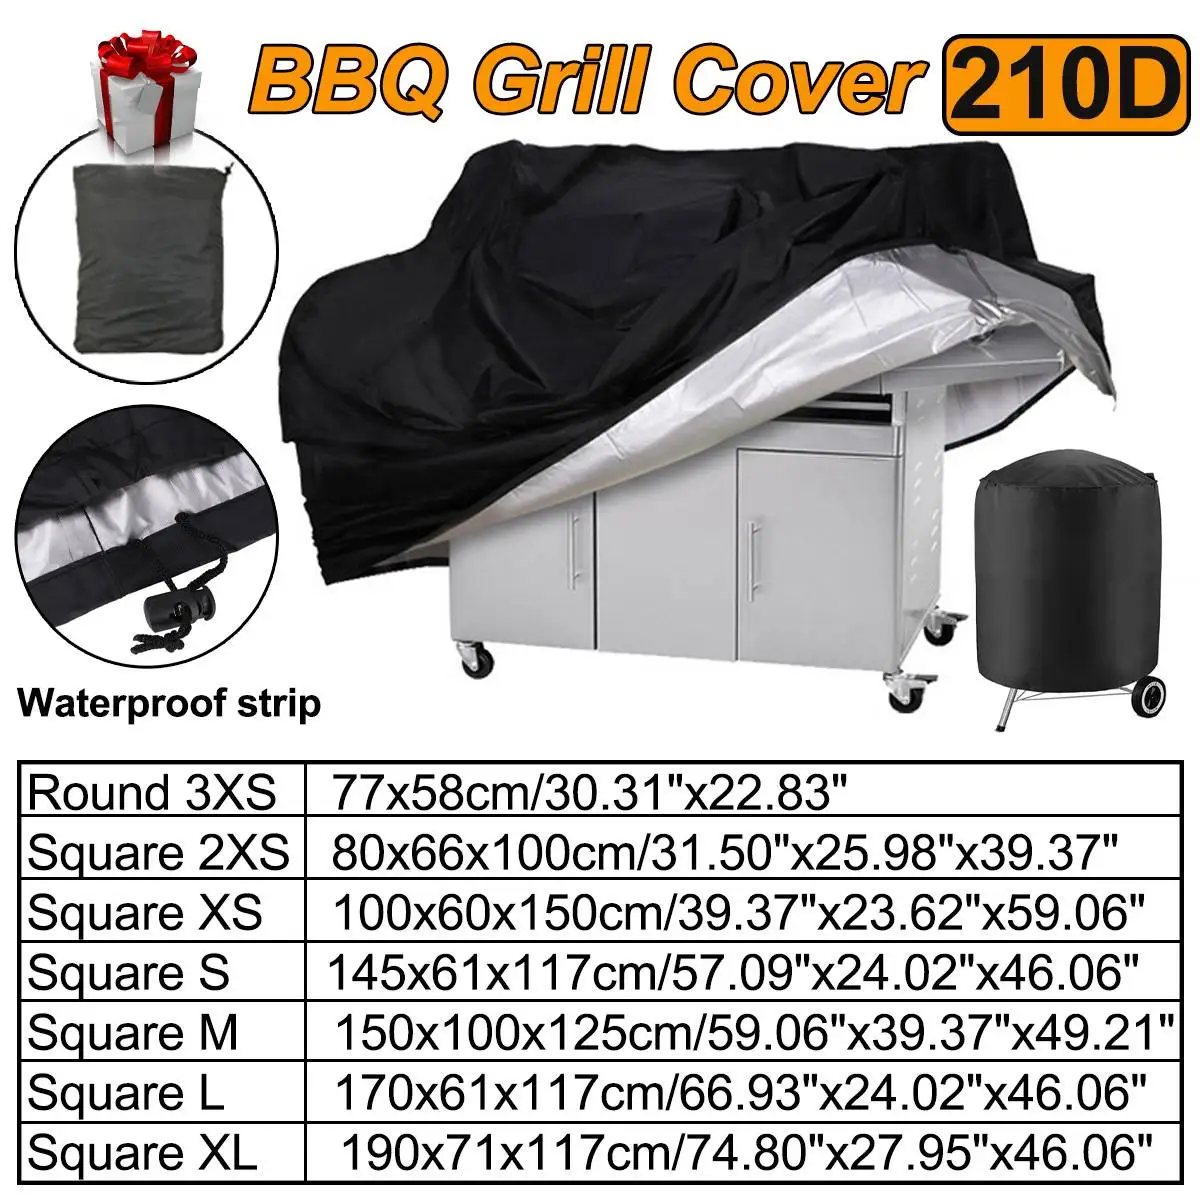 

Waterproof BBQ Cover Anti-Dust Outdoor Heavy Duty Charbroil Grill Cover Rain Protective Barbecue Cover 210D Black BBQ Cover